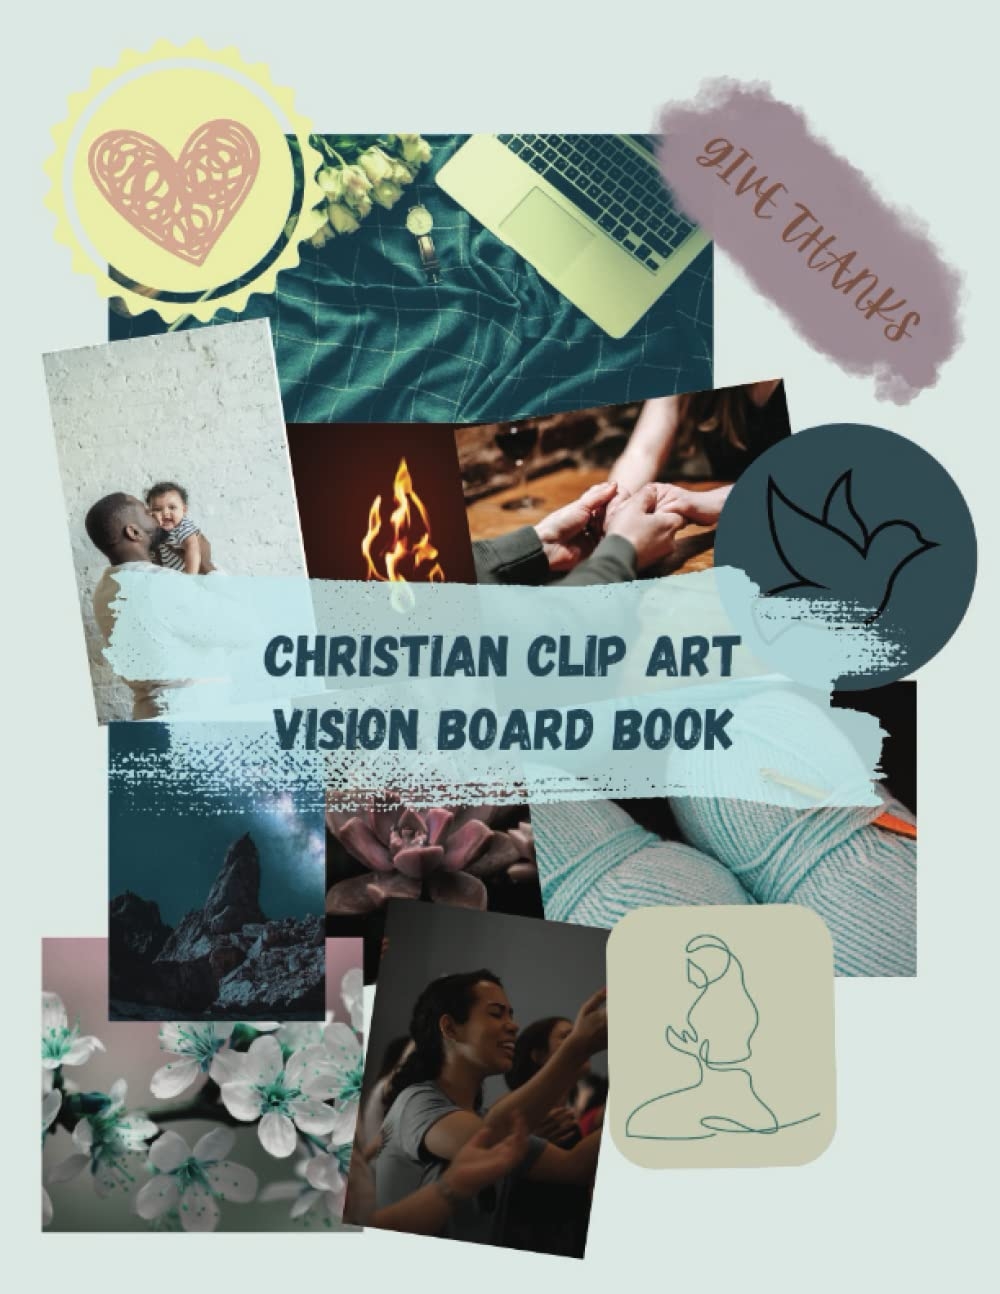 Vision Board Clip Art Book for Black Women: Create Powerful Vision Boards from 300+ Inspiring Pictures, Words and Affirmation Cards (Vision Board